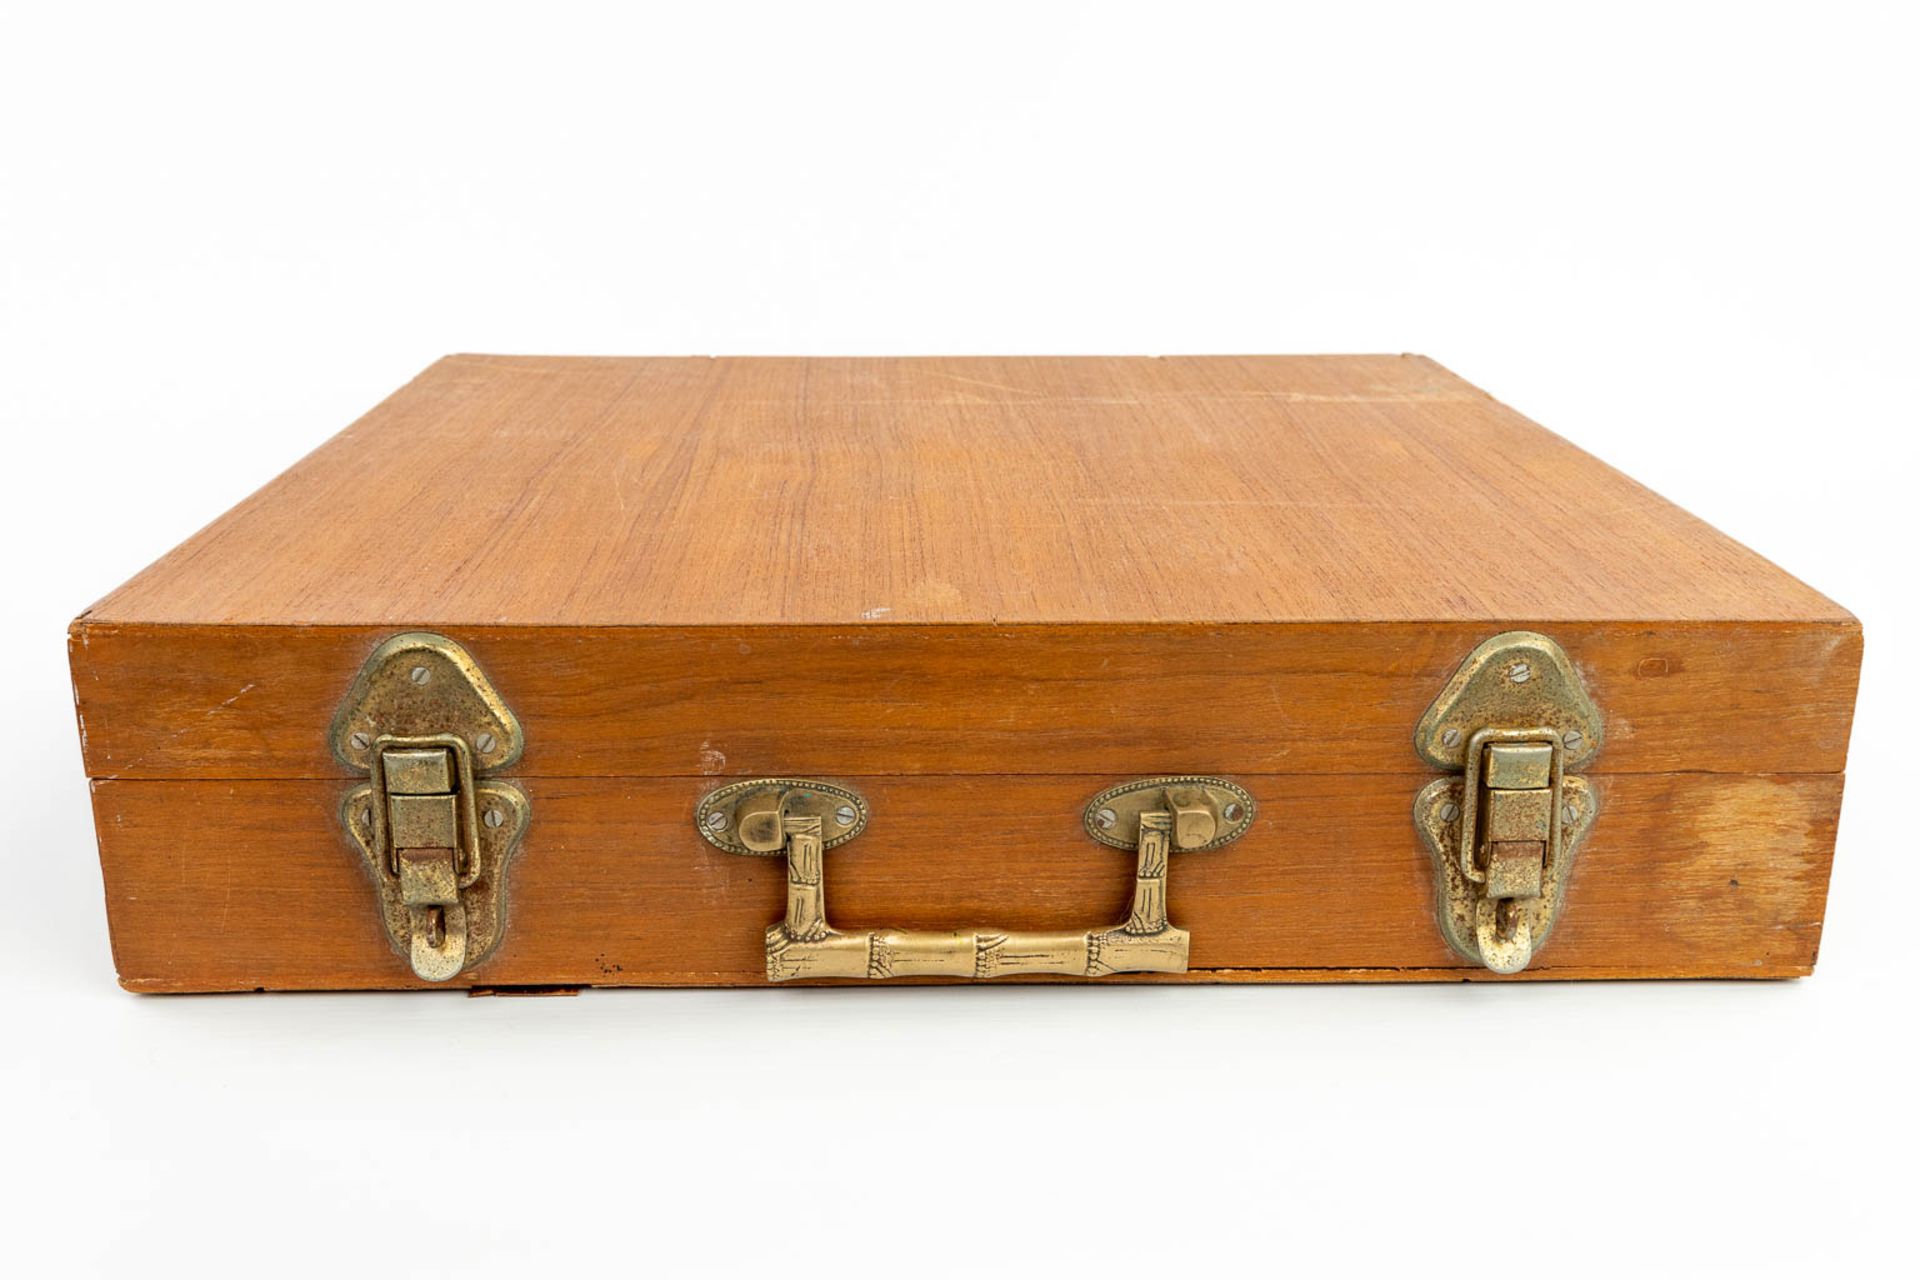 A cutlery case with gold-plated cutlery in a wood box. (H:10cm) - Image 6 of 12